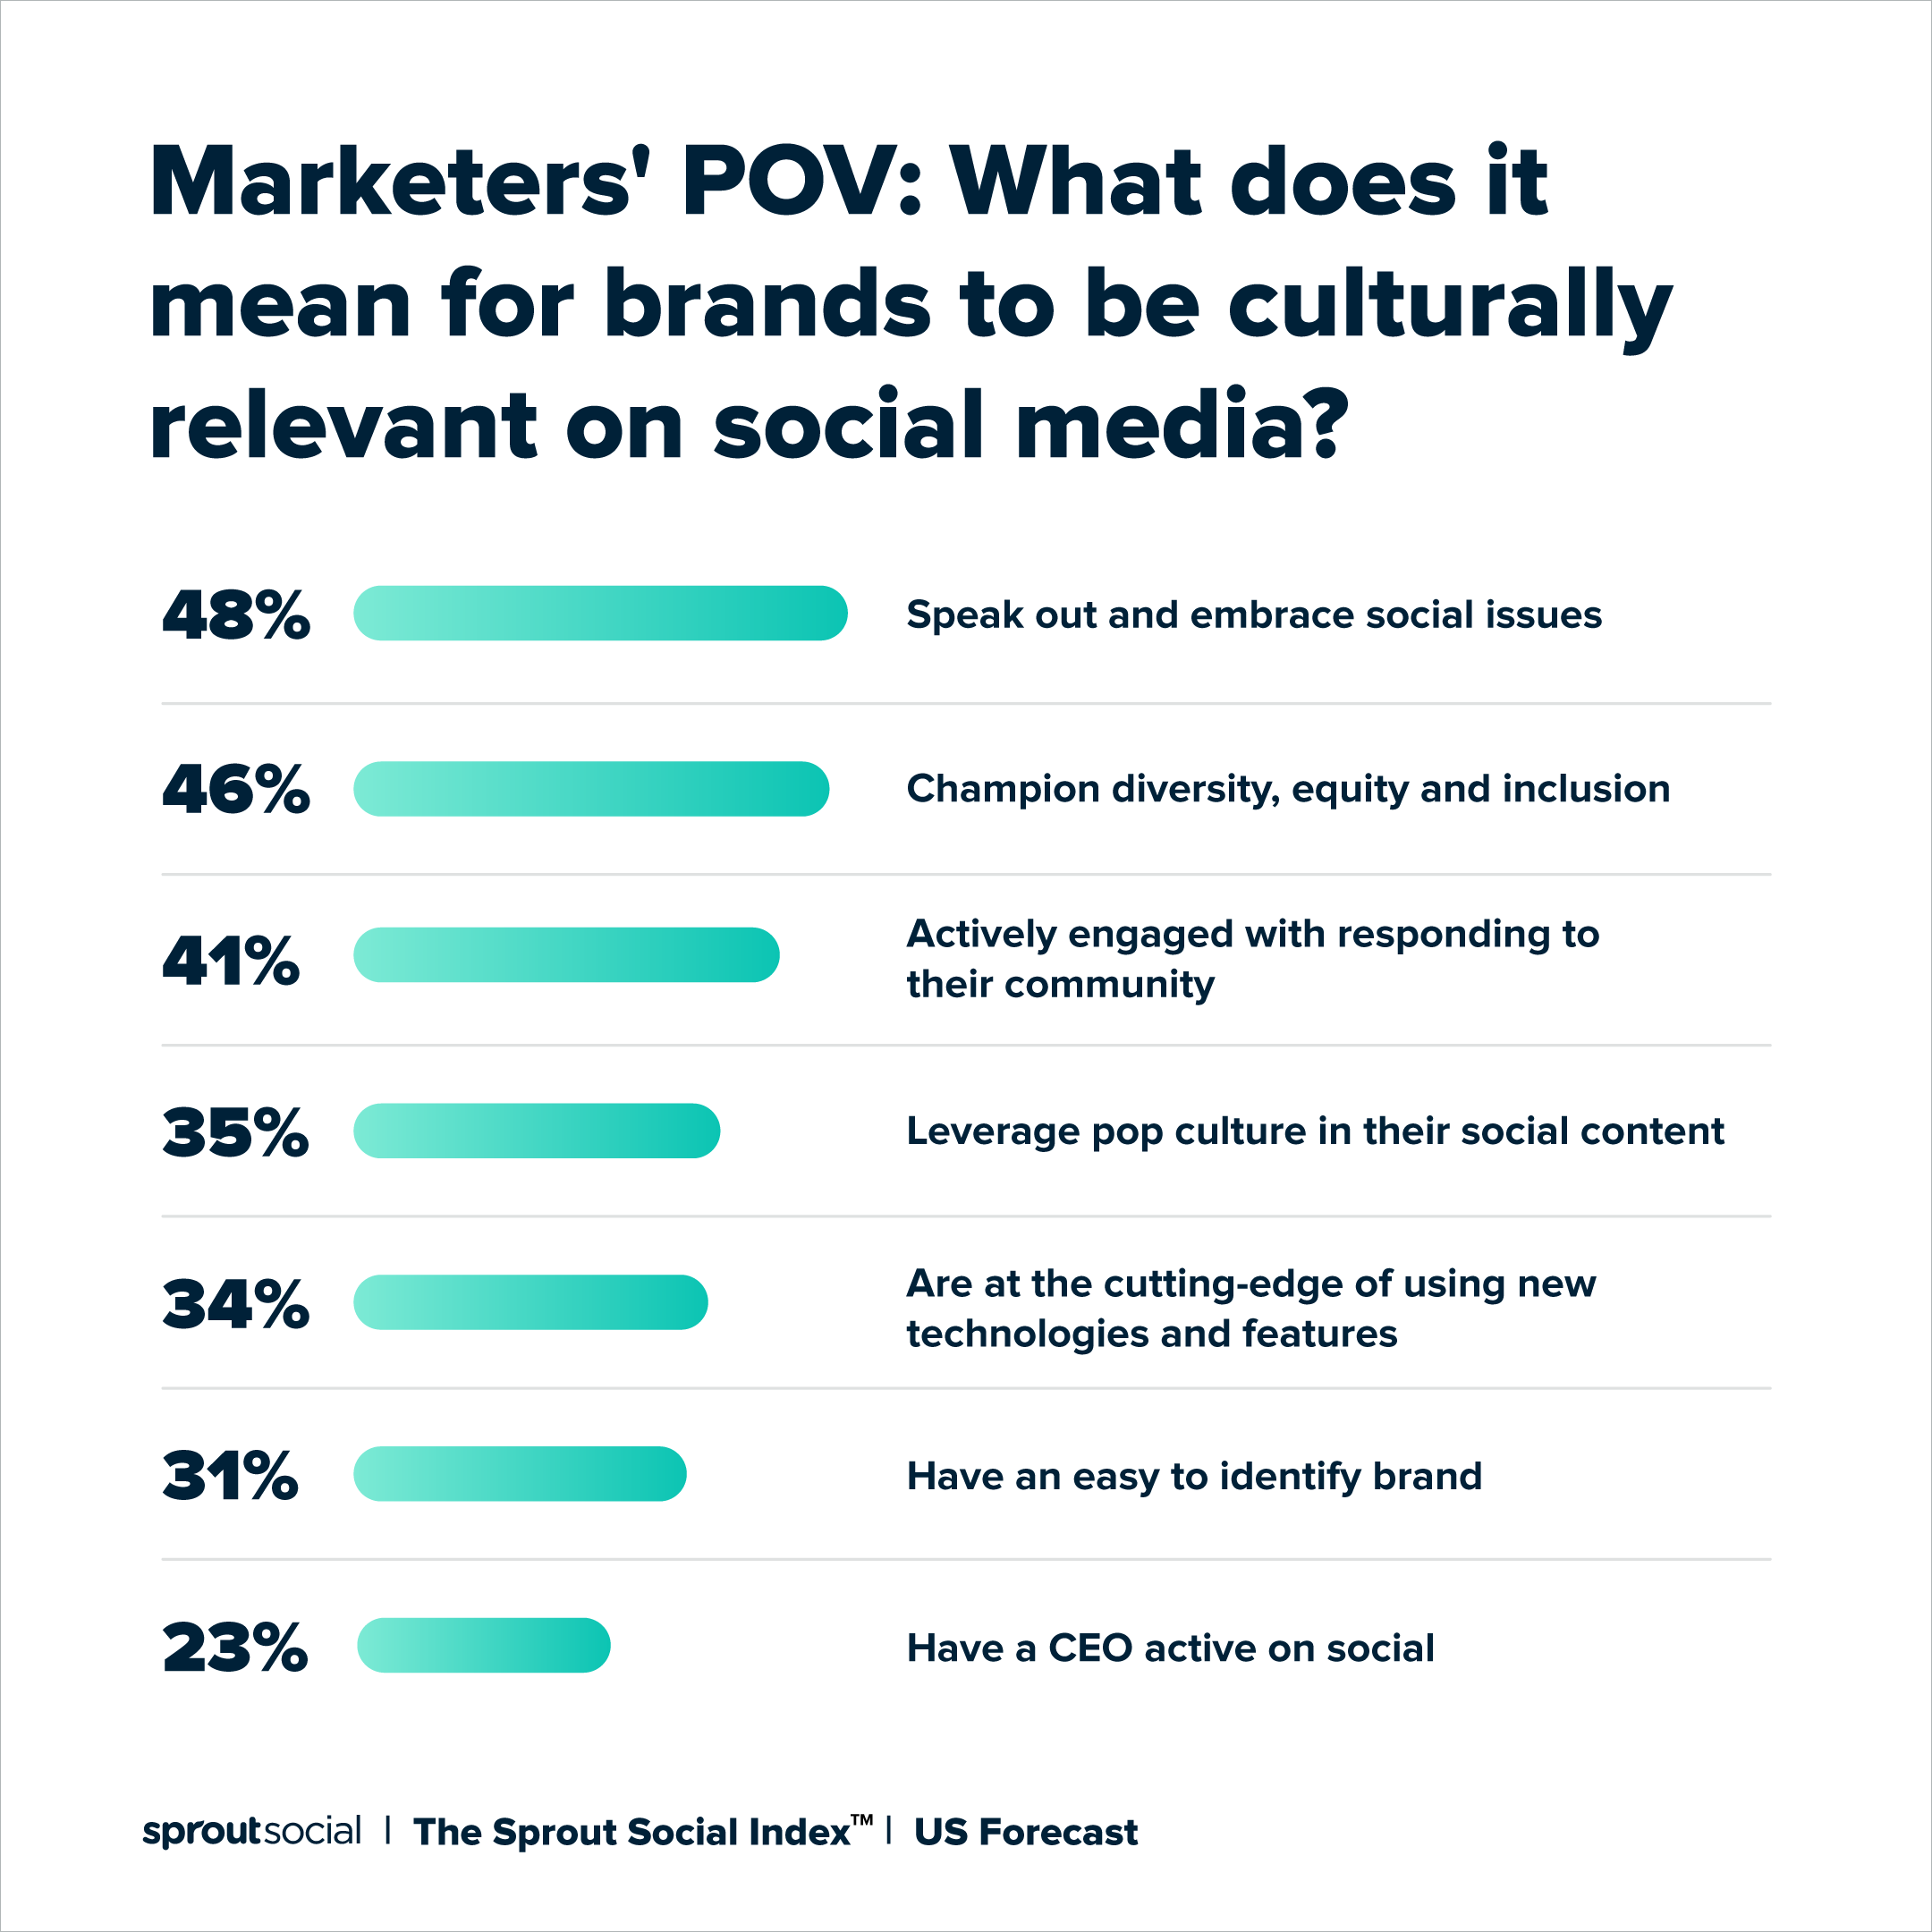 A data visualization that reads: Marketers' POV: What does it mean for brands to be culturally relevant on social media? The topic response is "speak out on and embrace social issues" with 48% of marketers agreeing.